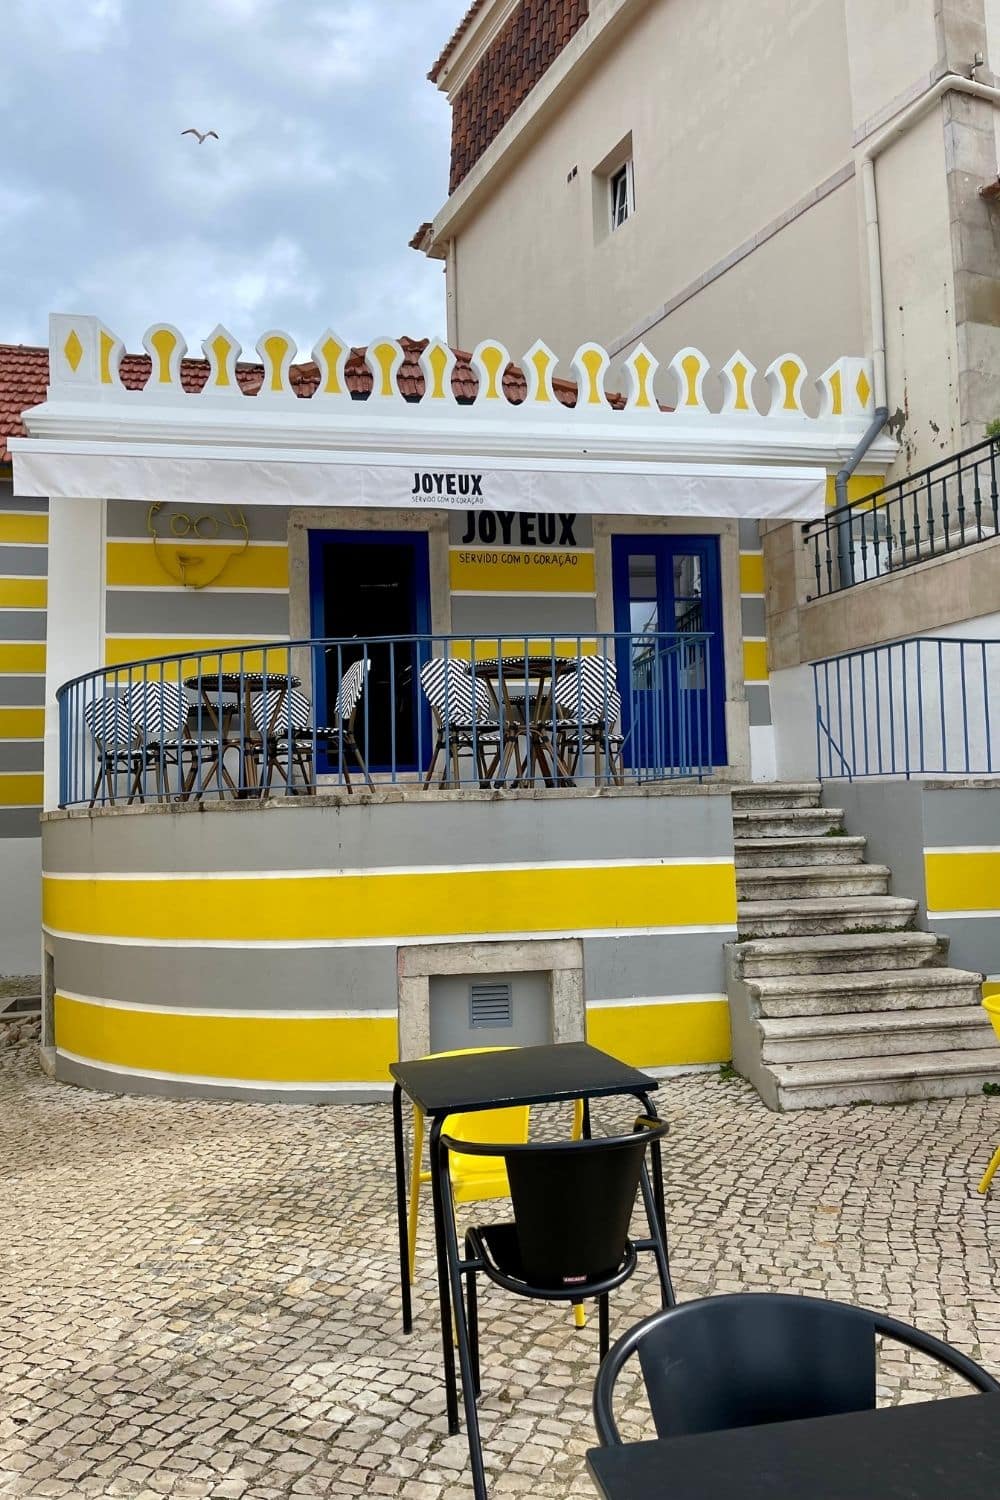 A charming café exterior is painted in bright yellow and white stripes, with a bold blue sign reading "JOYEUX" above the entrance, implying a cheerful, welcoming atmosphere. The terrace has several tables with patterned tablecloths, and the ground is traditional cobblestone. A simplistic line drawing of a smiling face adorns the wall beside the café's name, enhancing the joyful vibe of the establishment.